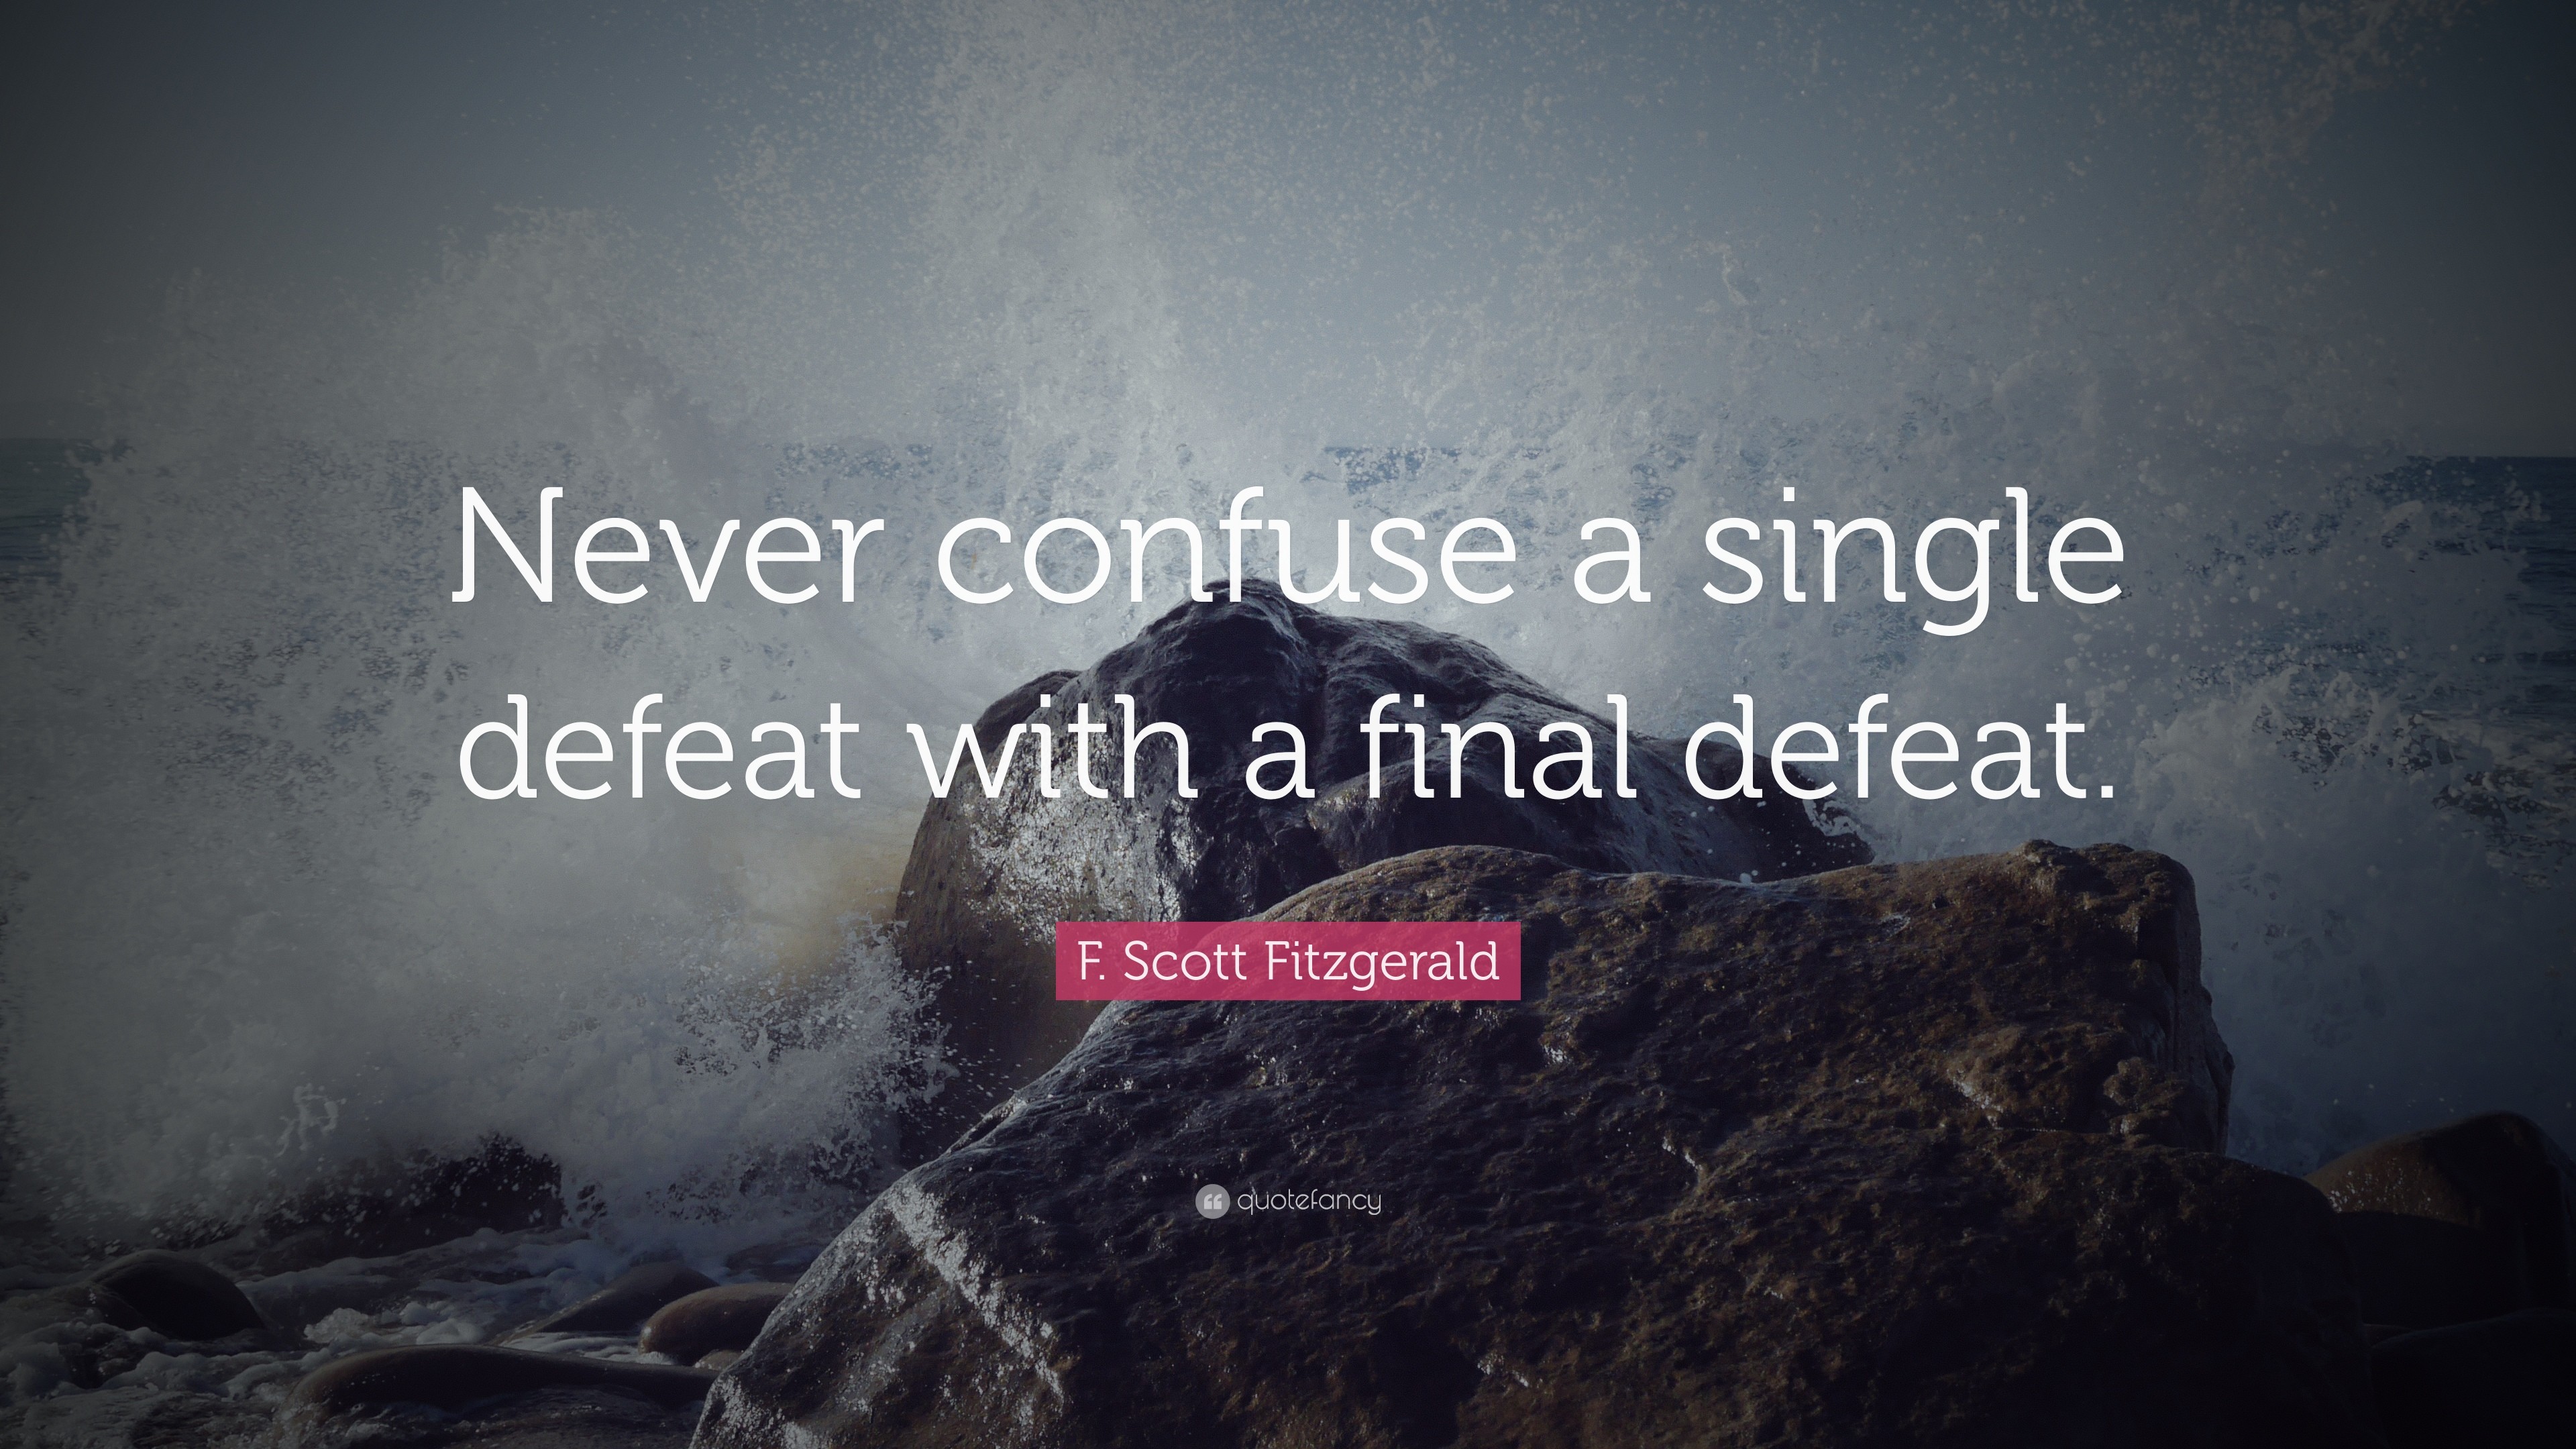 Spiritual Quotes Never confuse a single defeat with a final defeat.